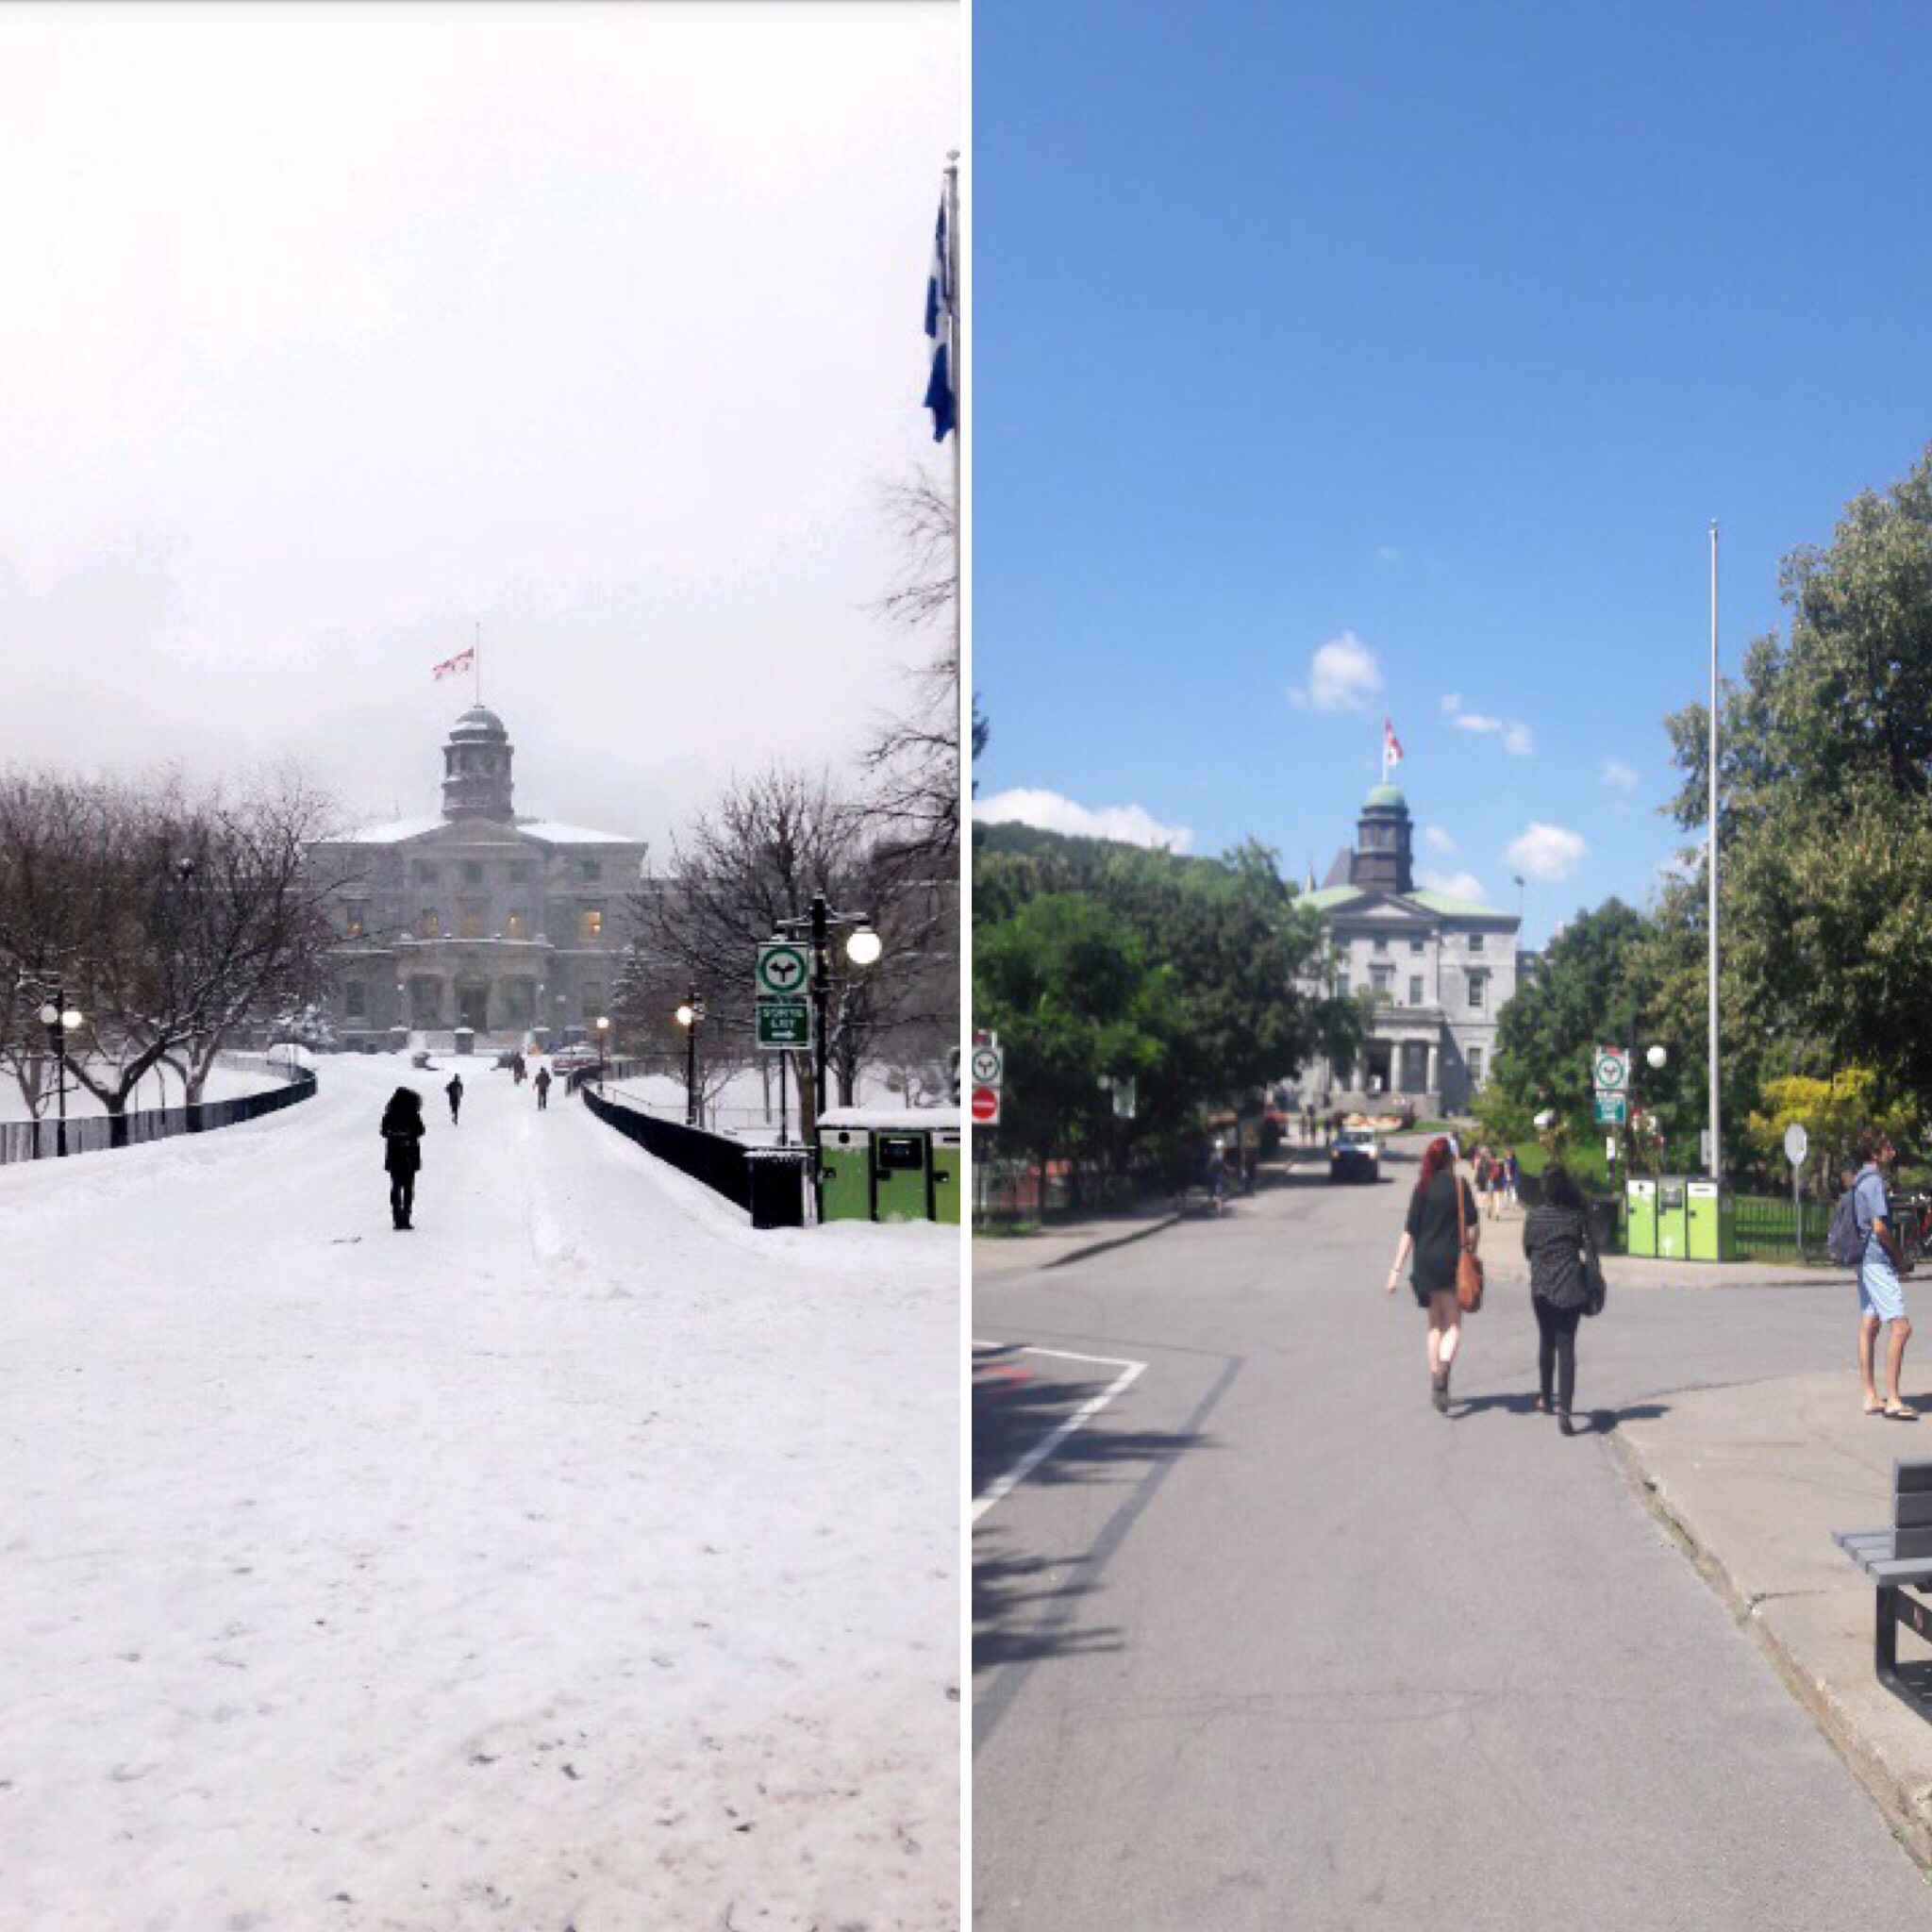 The famous McGill University arts building in the summer and winter months